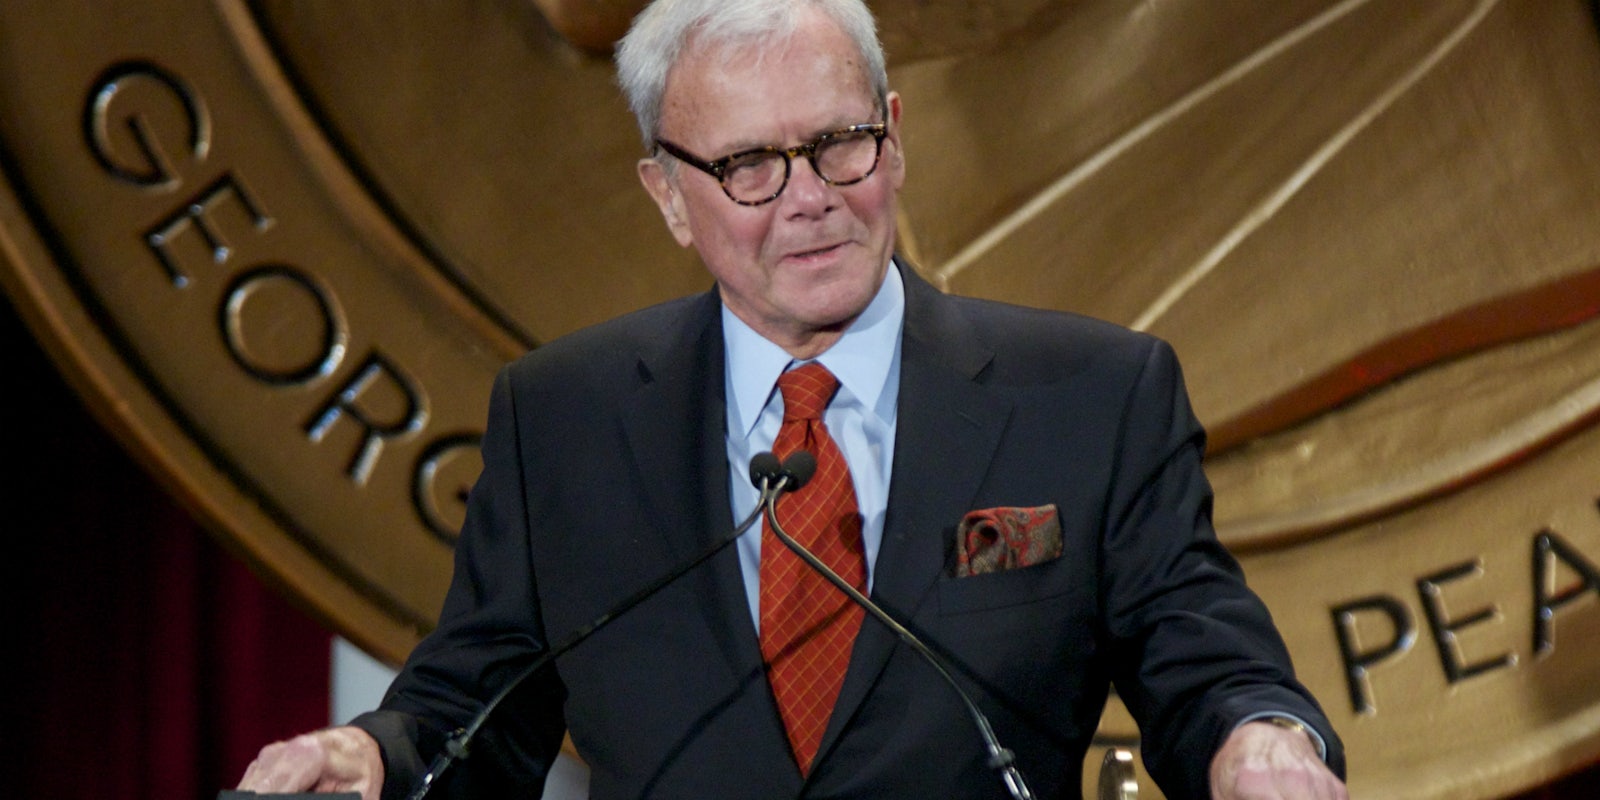 NBC News anchor Tom Brokaw has denied sexual harassment accusations levied against him.